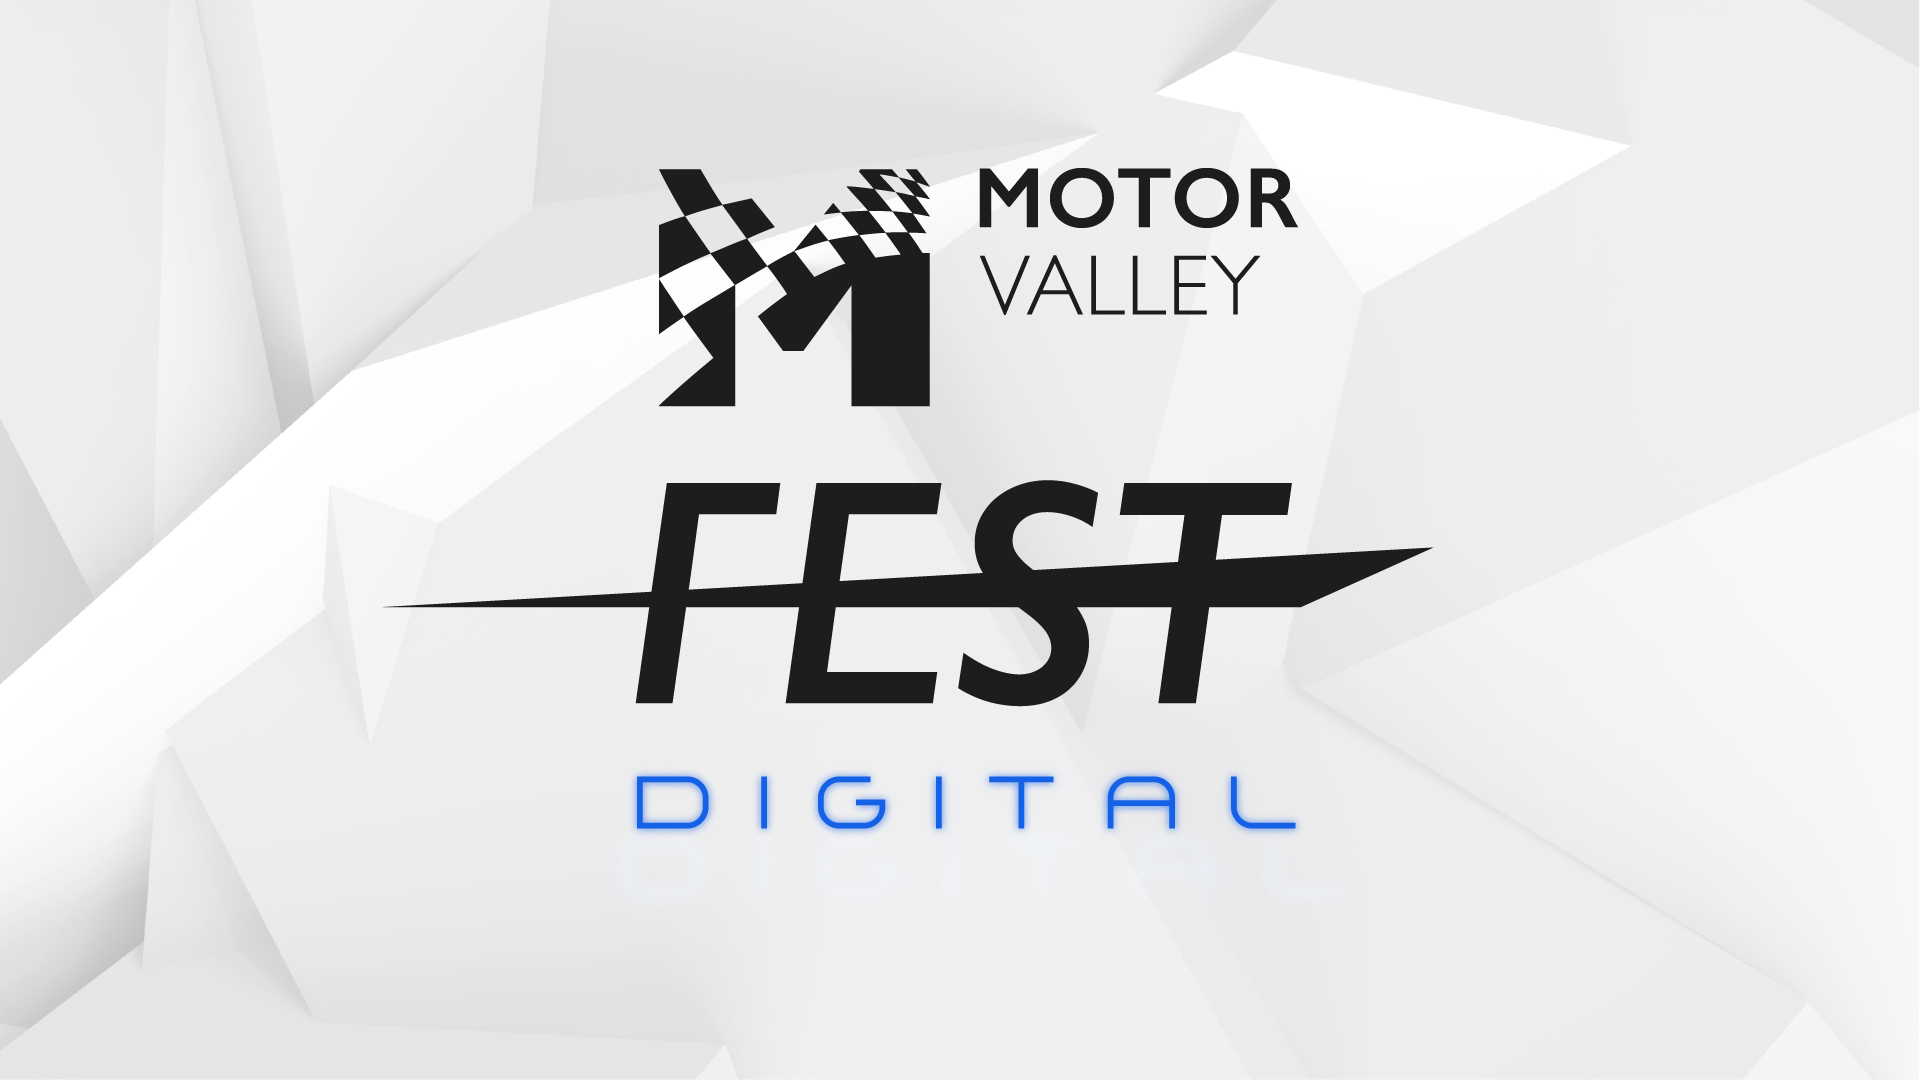 Emilia-Romagna’s Motor Valley Fest to take on a Digital Format when it returns in May 2020.